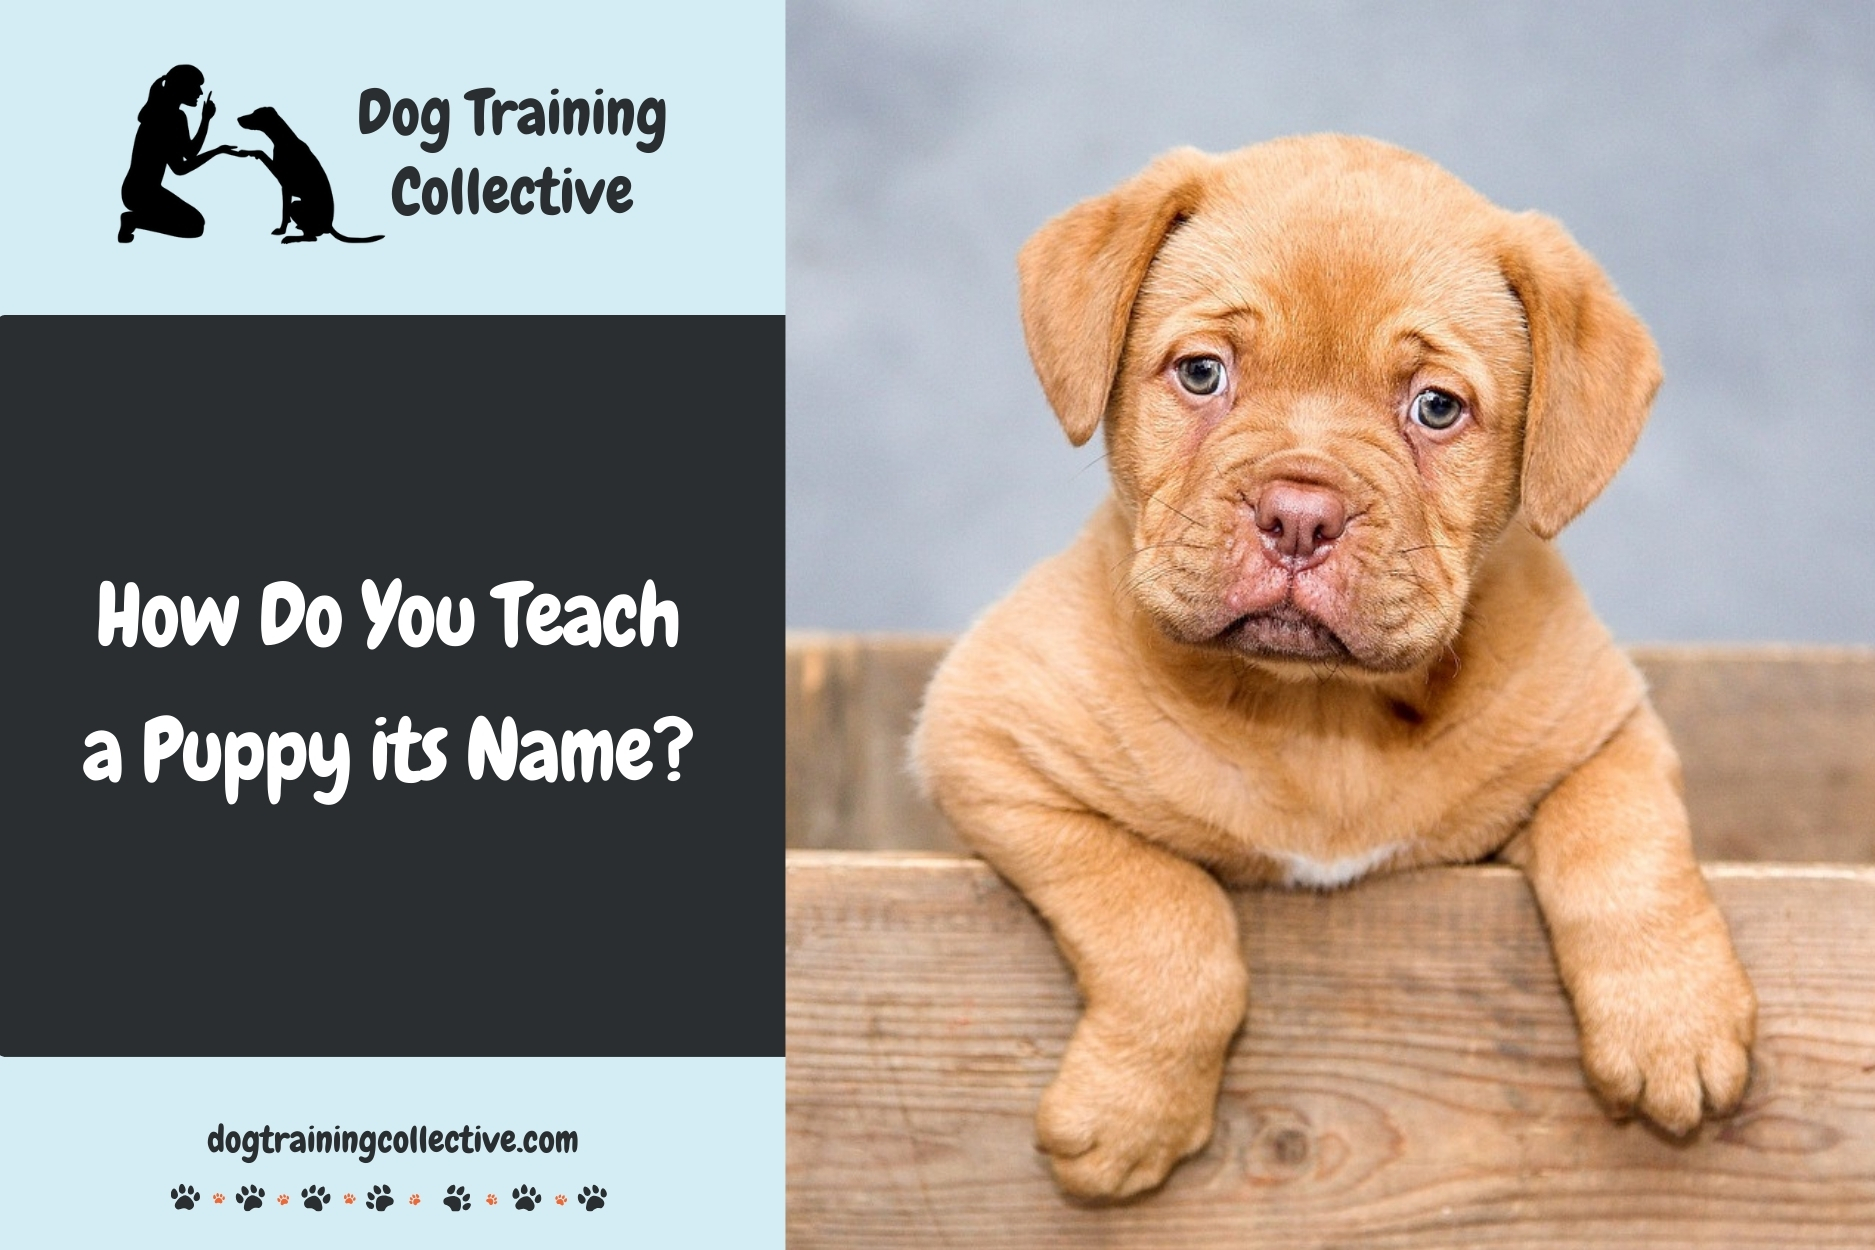 How Do You Teach a Puppy its Name